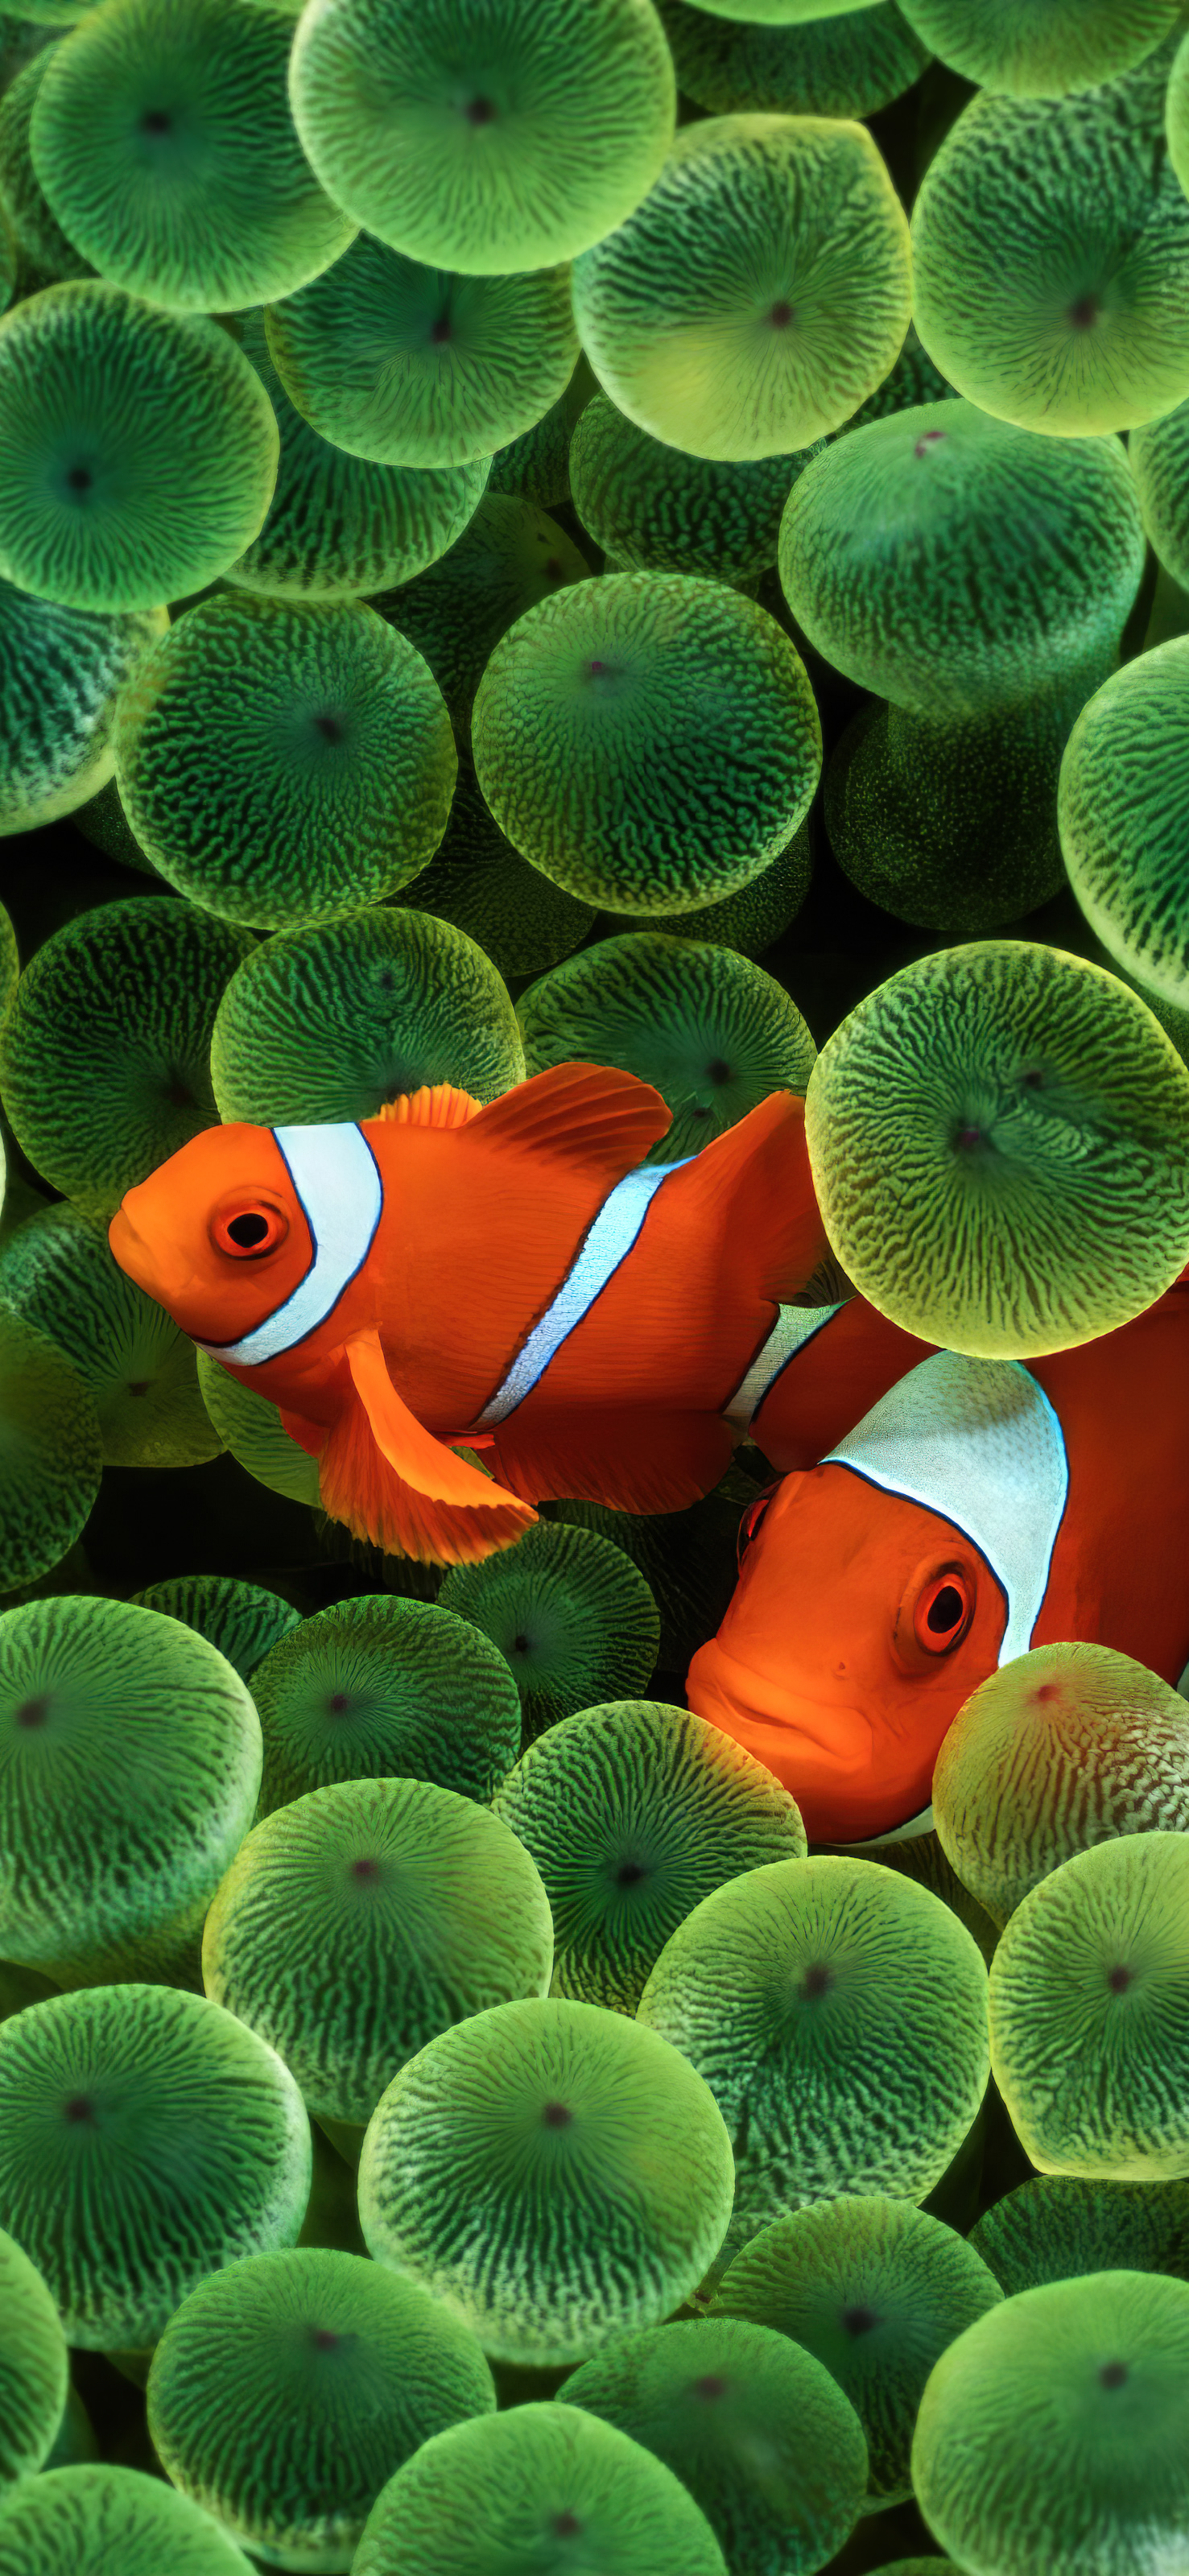 The old Apple Clown Fish wallpaper upscaled to [5120x3200]